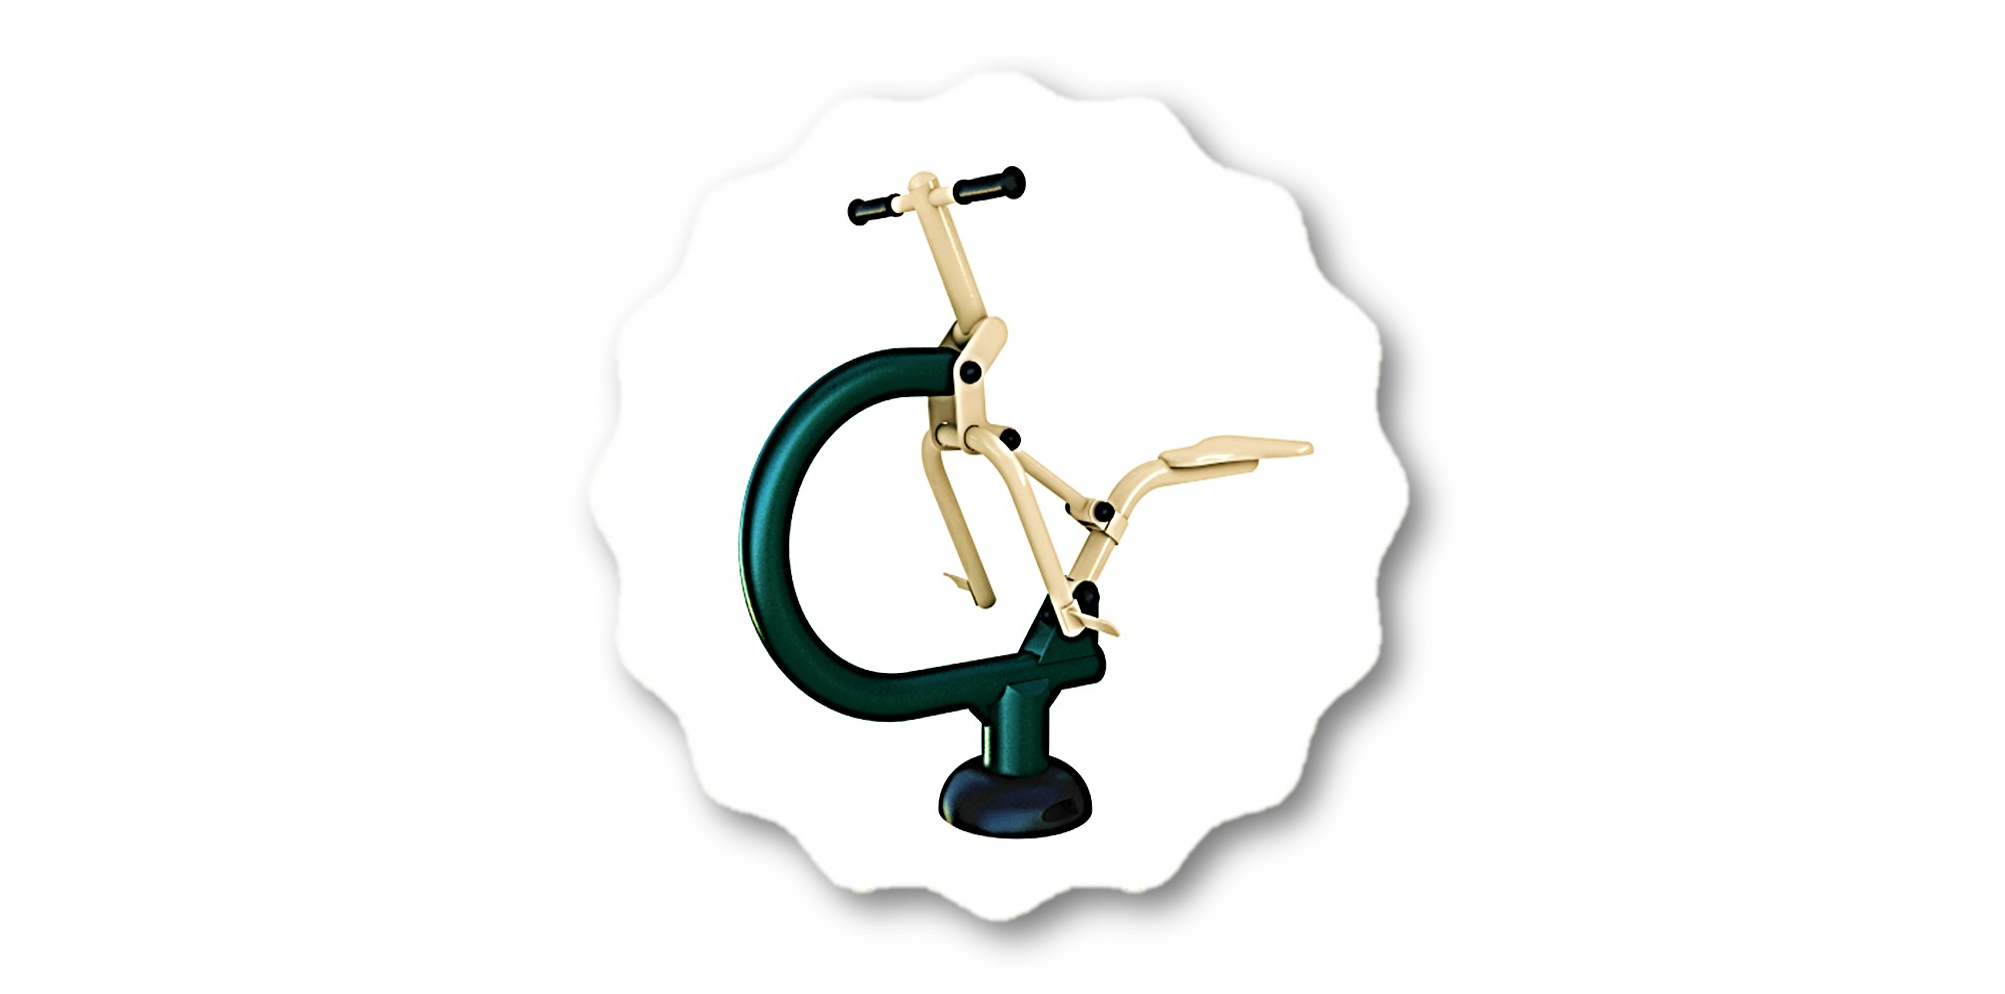 Gym clipart gym accessory. Outdoor equipment green air